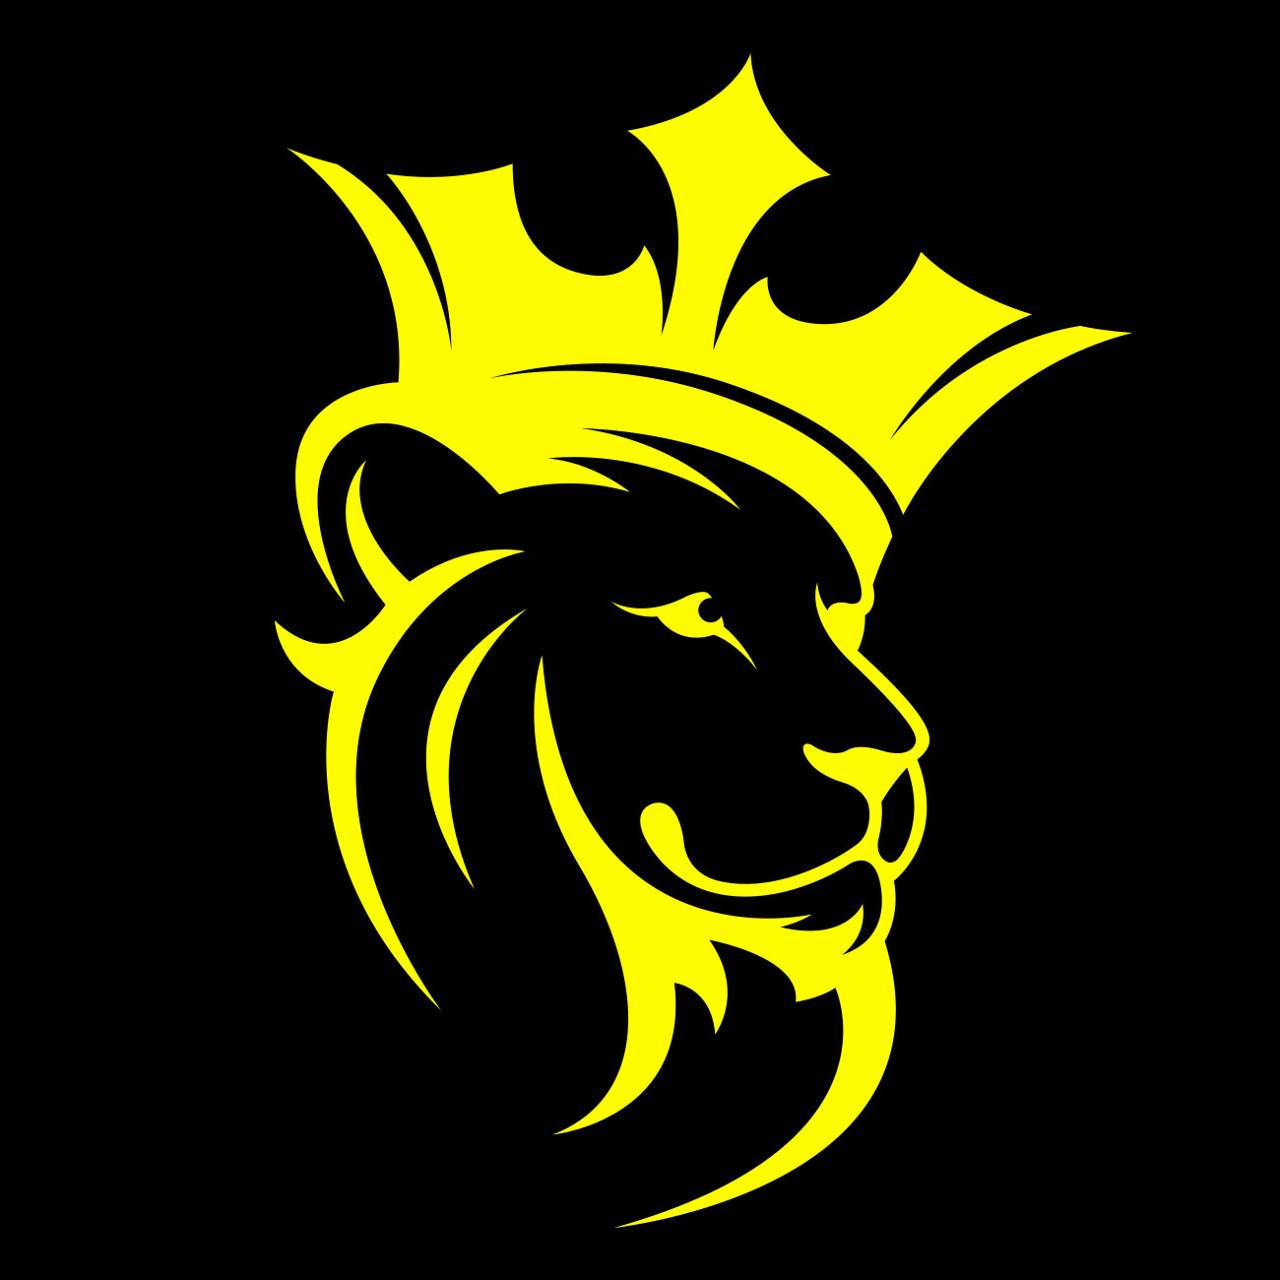 Cheery Lion Crowned King Logo